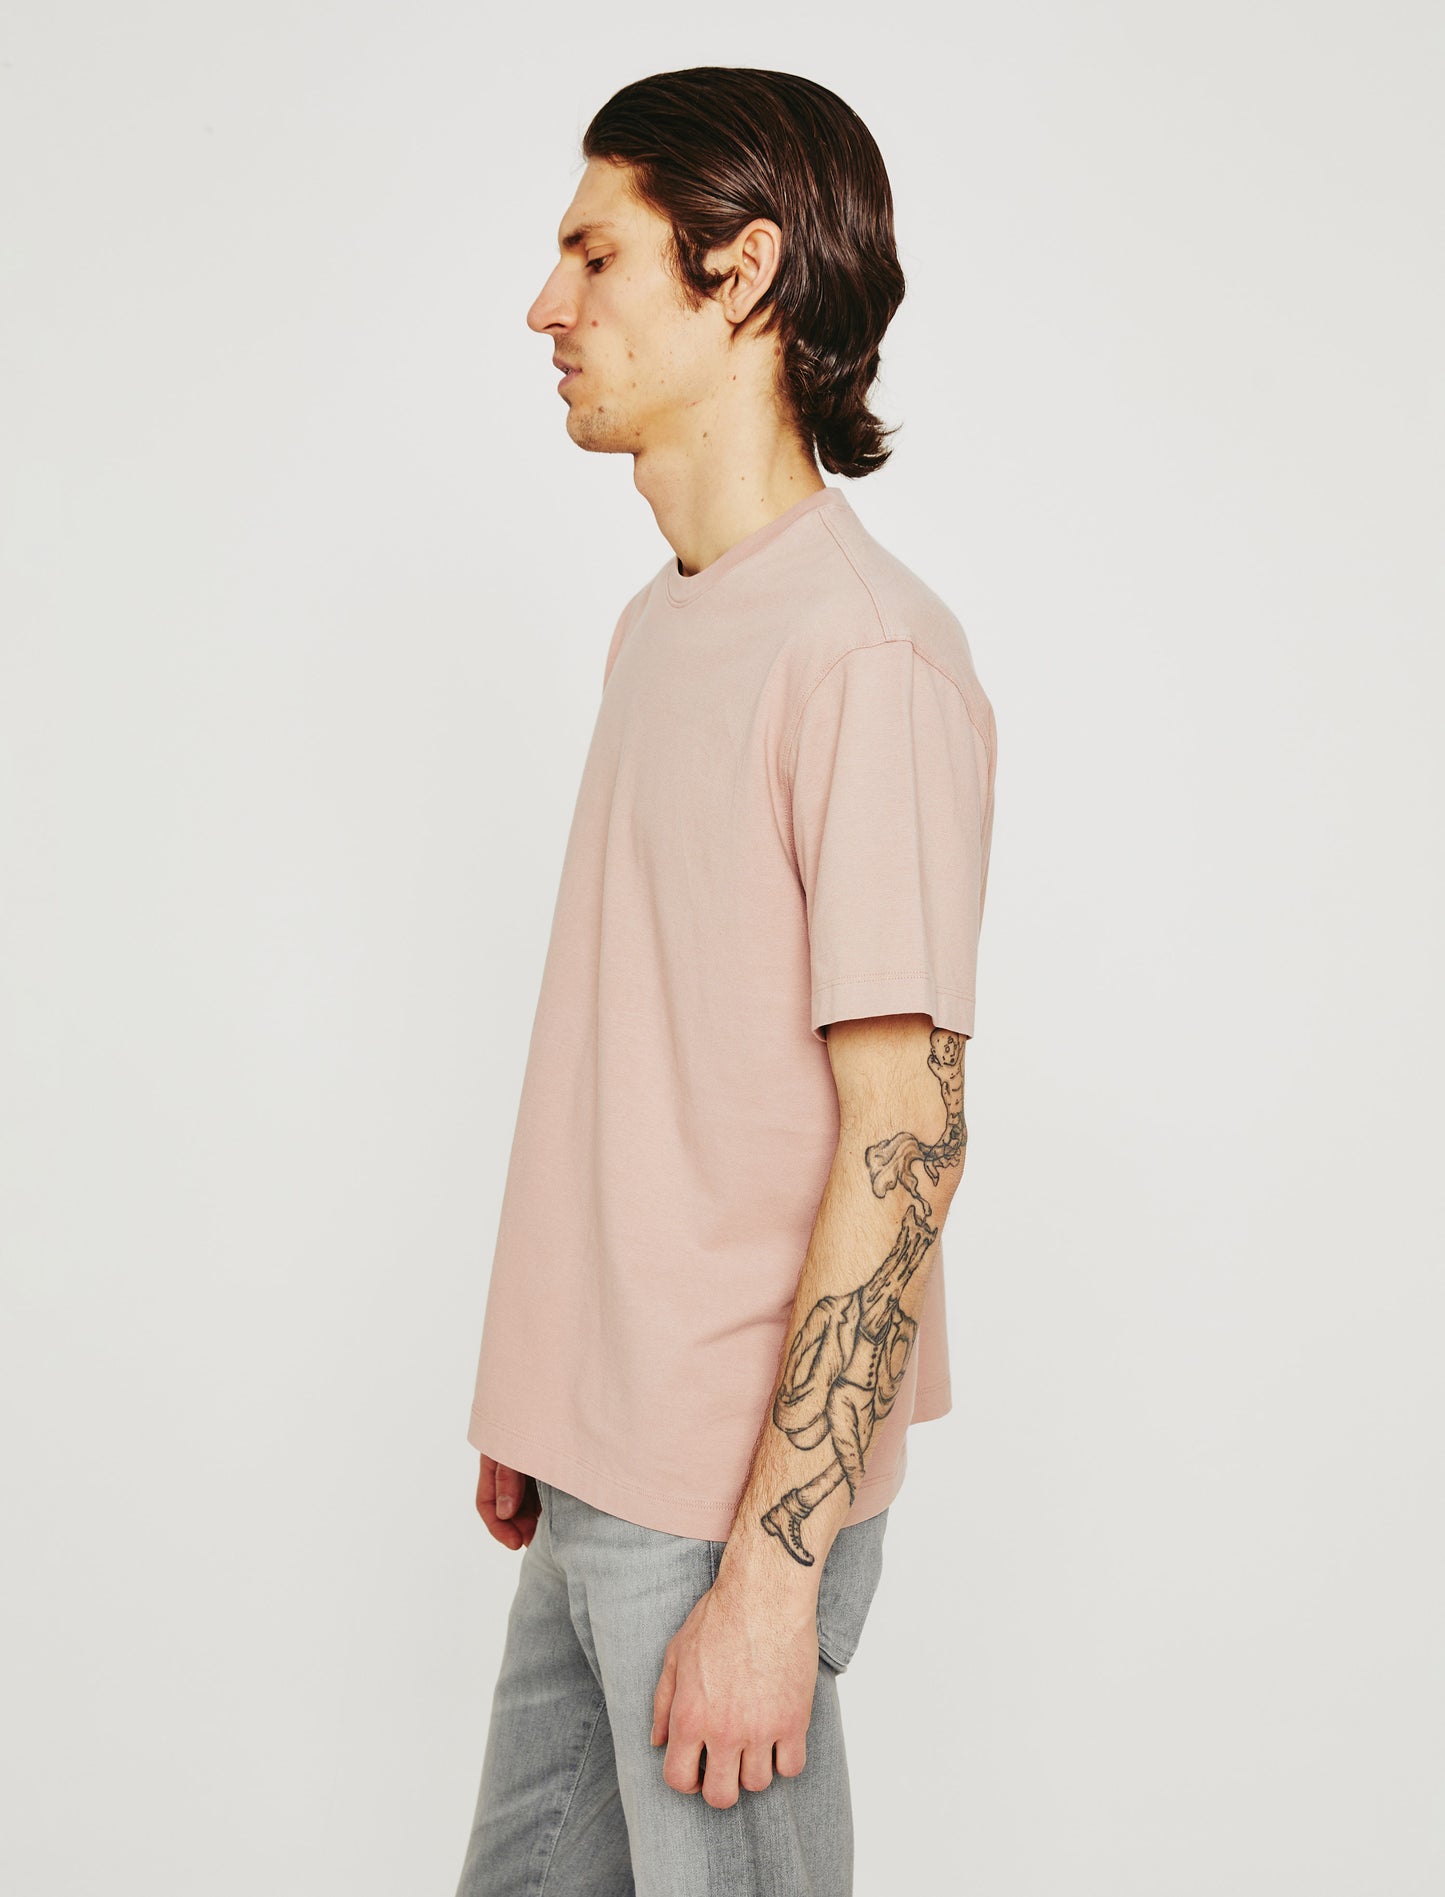 Wesley Crew Rose Cloud Relaxed T-Shirt Men Top Photo 5